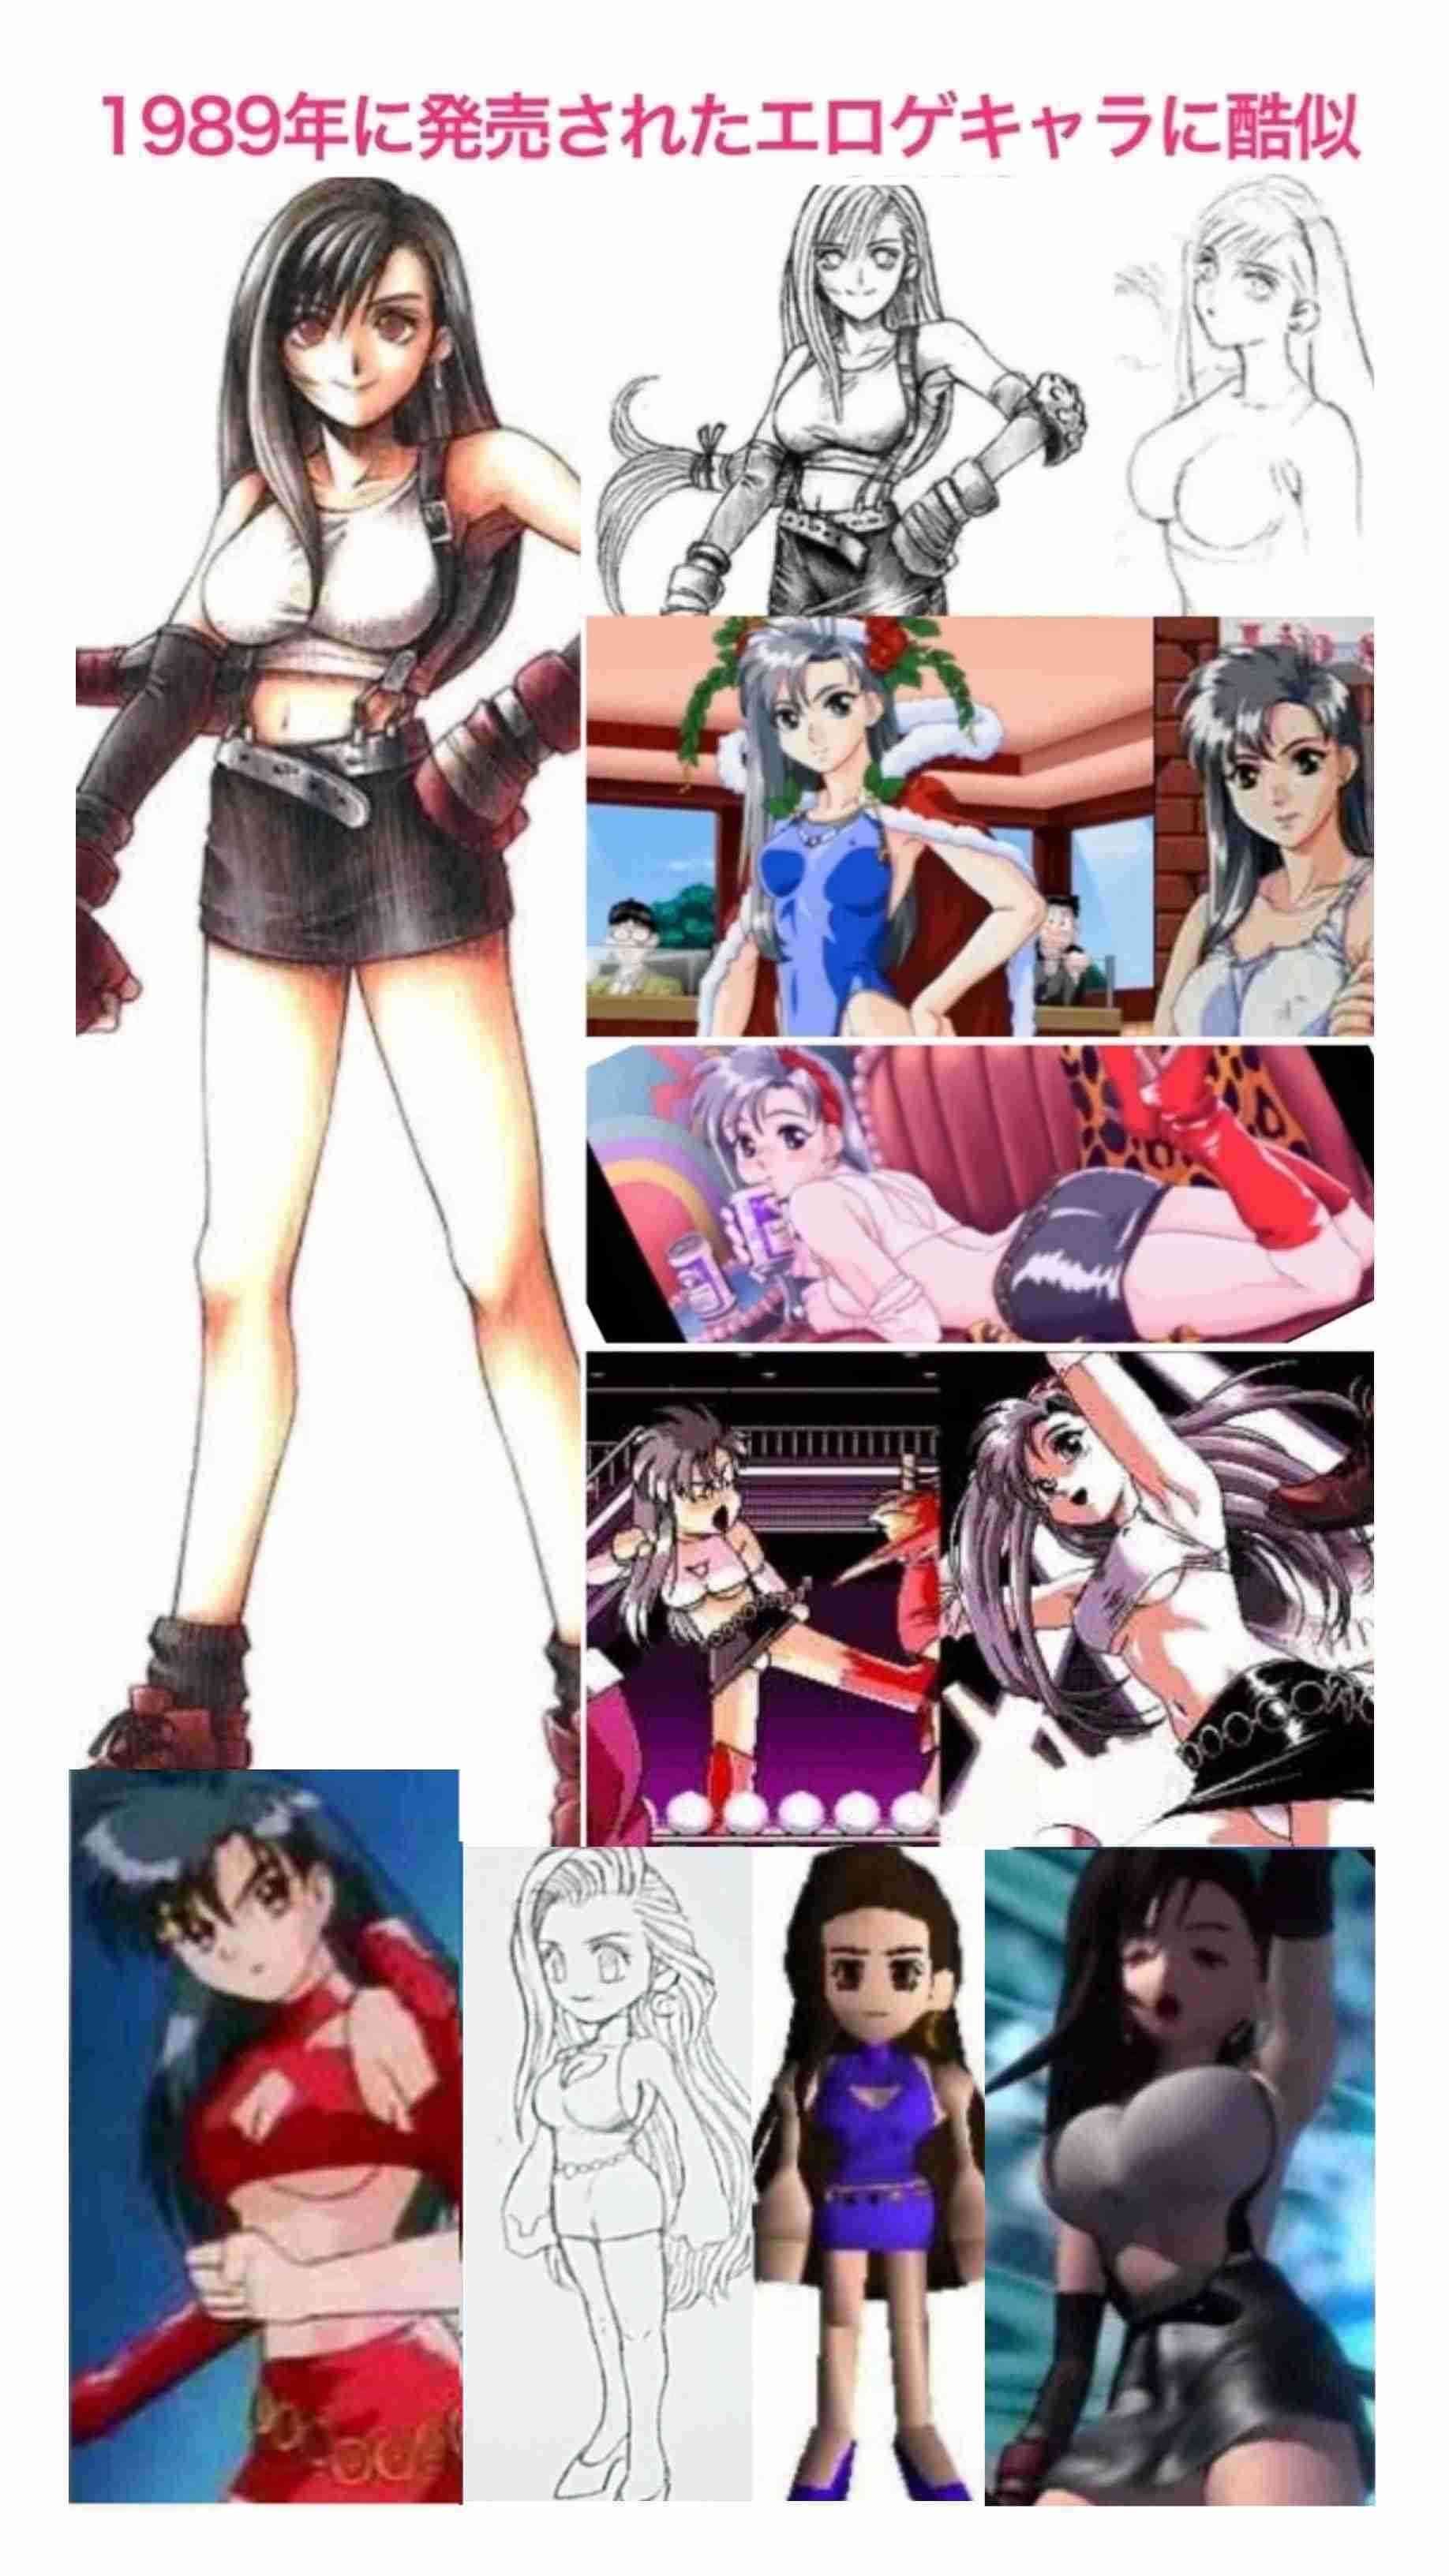 Crimson is the first person who portrayed Ff7's Tifa erotic, isn't he? 8